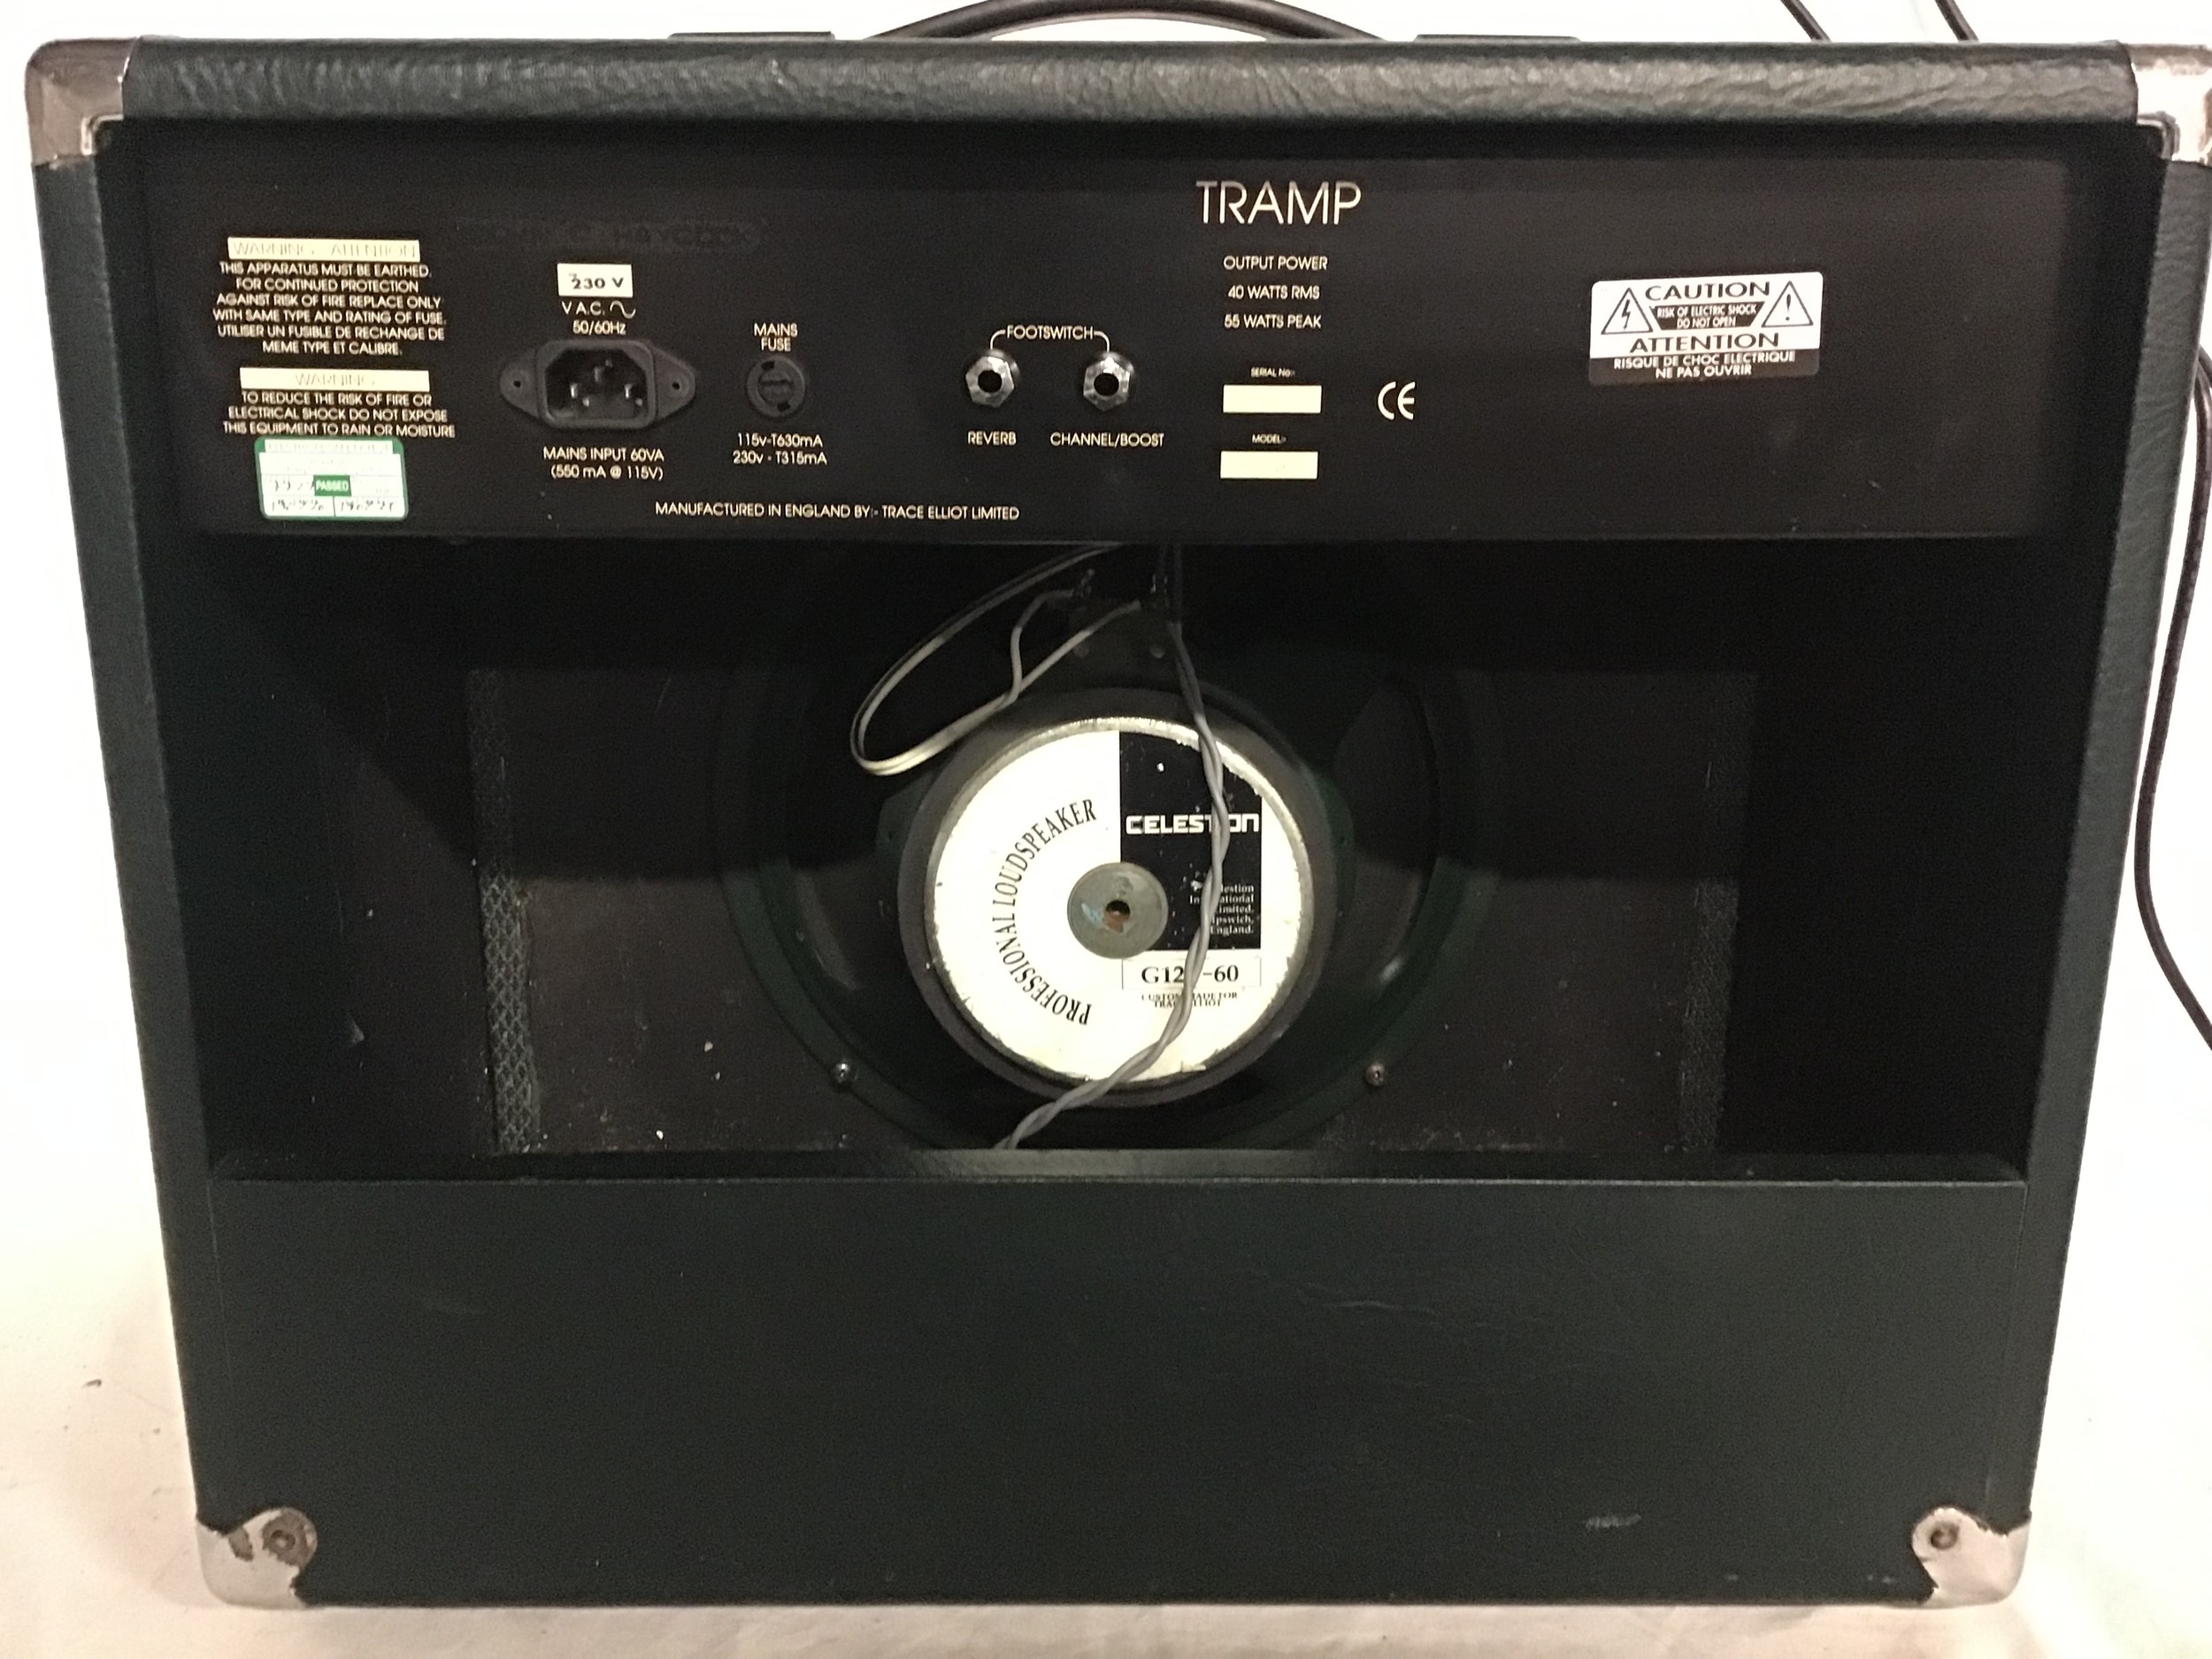 TRACE ELLIOT GUITAR AMPLIFIER. This is named ‘Tramp’ and powers up when plugged in. Comes with - Image 3 of 3